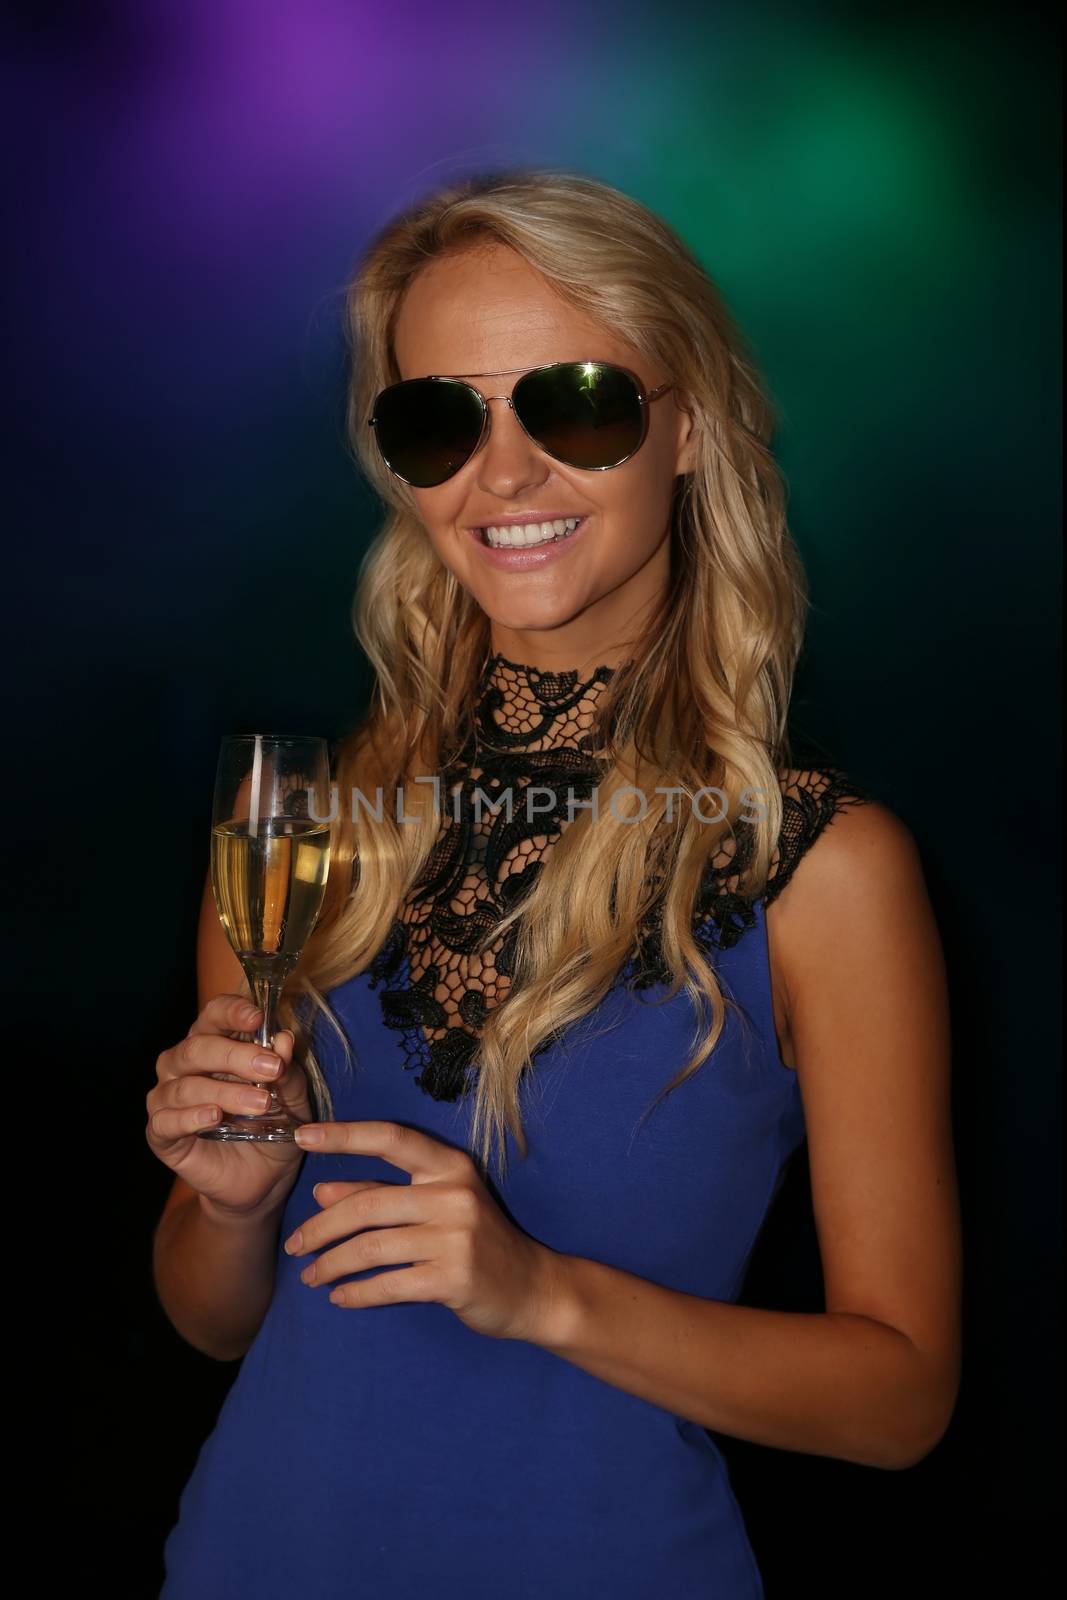 Gorgeous Young Woman at Party by fouroaks